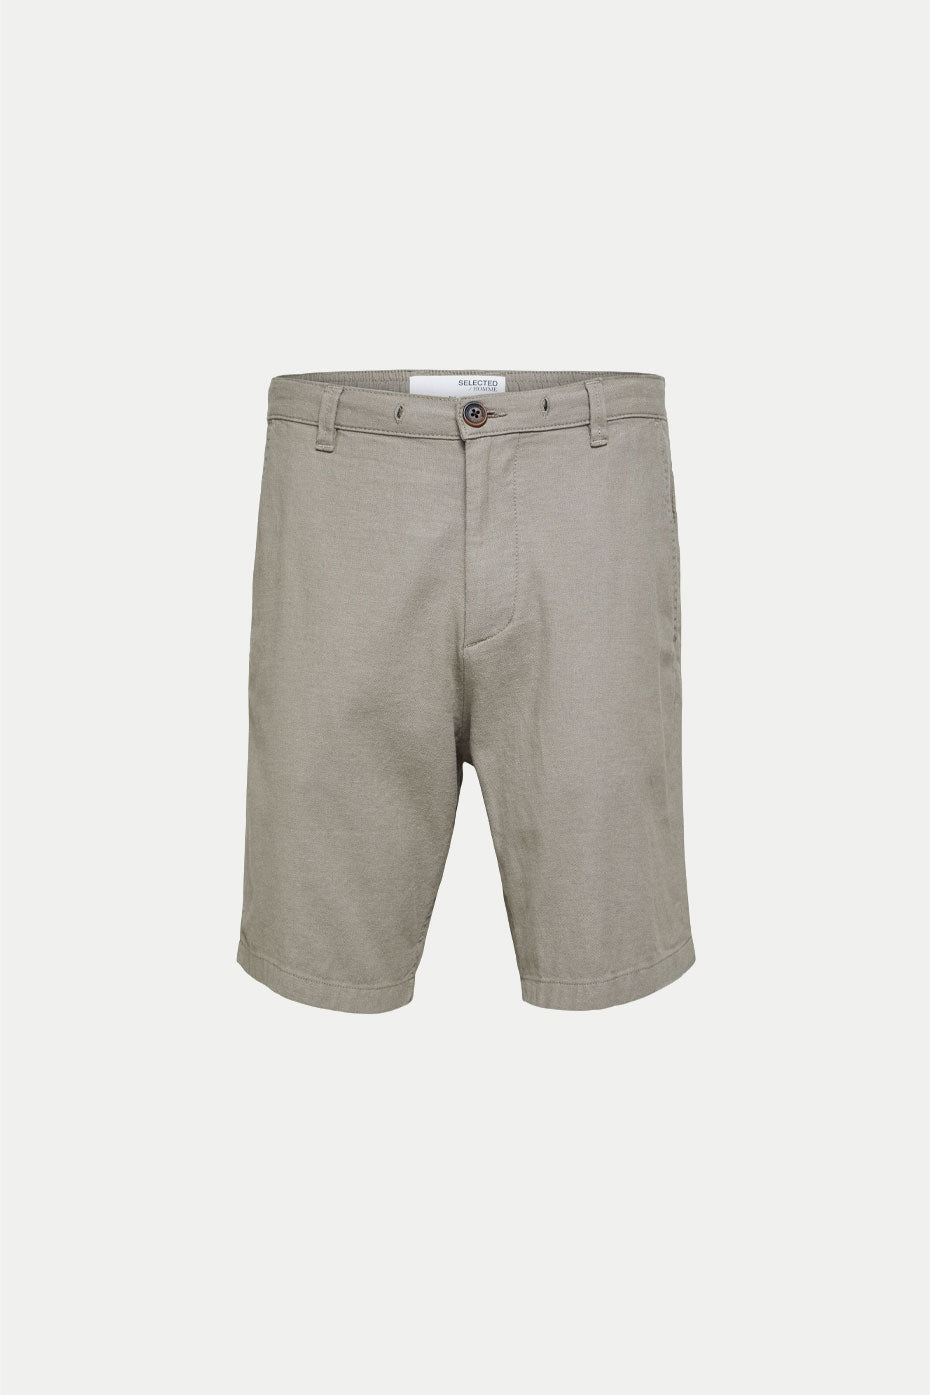 Selected Homme Vetiver Brody Linen Shorts